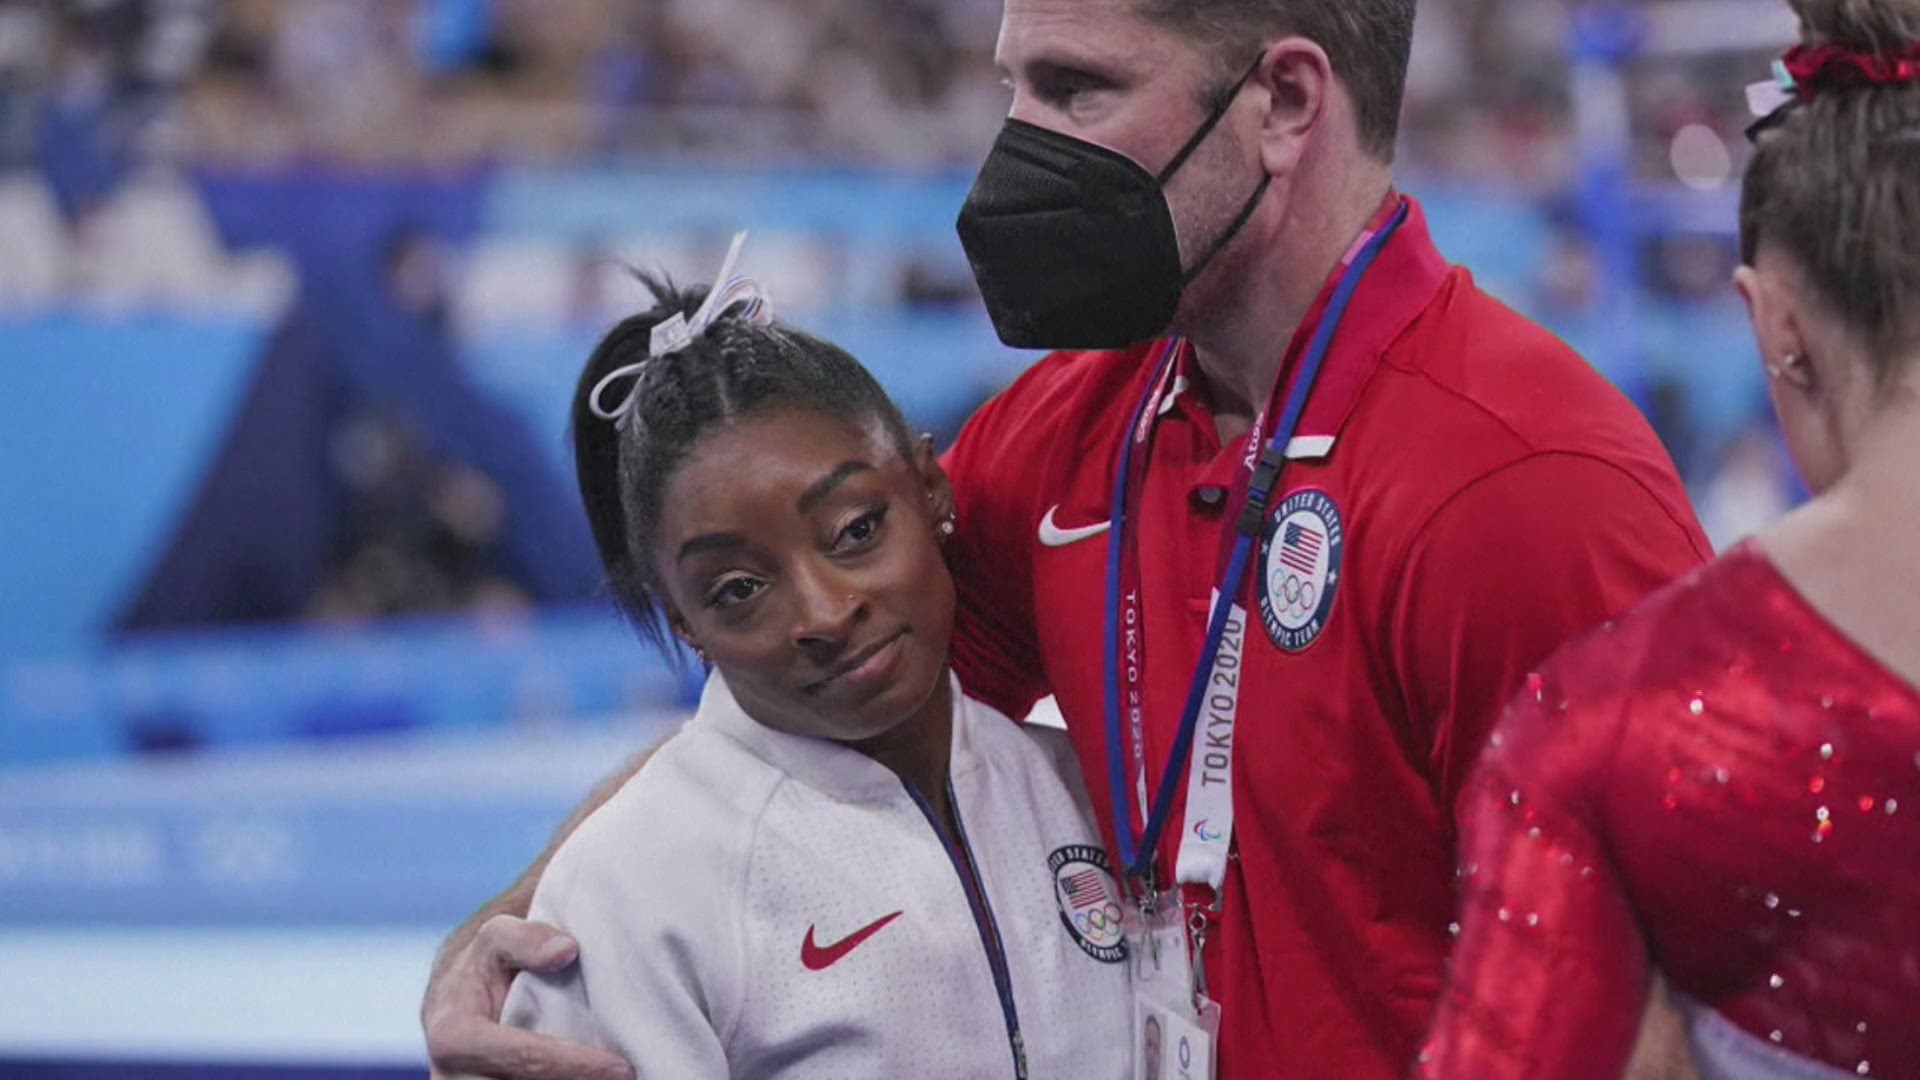 Simone Biles will not defend her Olympic title in the all-around competition in order to focus on her mental well-being.